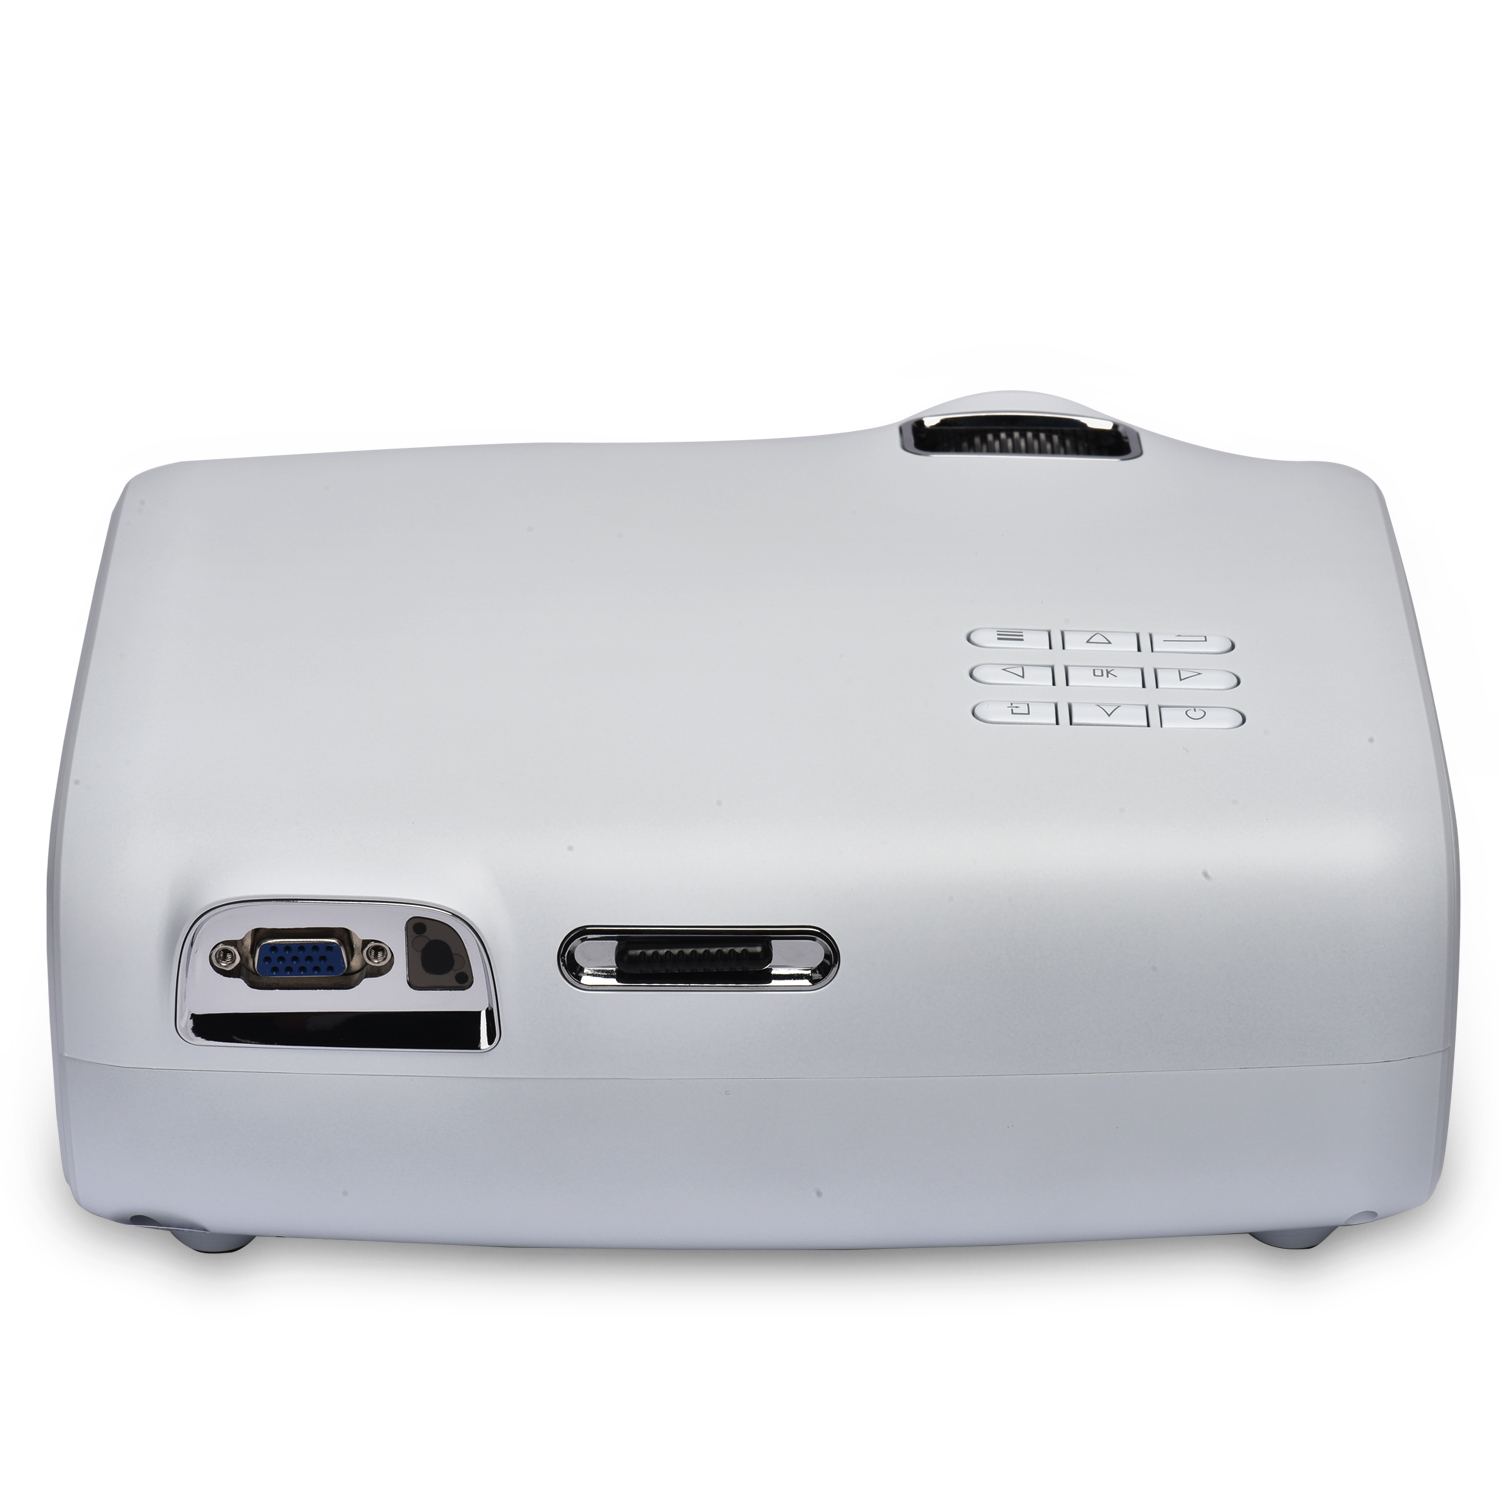 Everycom Mini TV 800 Lumens LED Corded Portable Projector (White) in  Raipur-Chhattisgarh at best price by Bhavya Innovation - Justdial